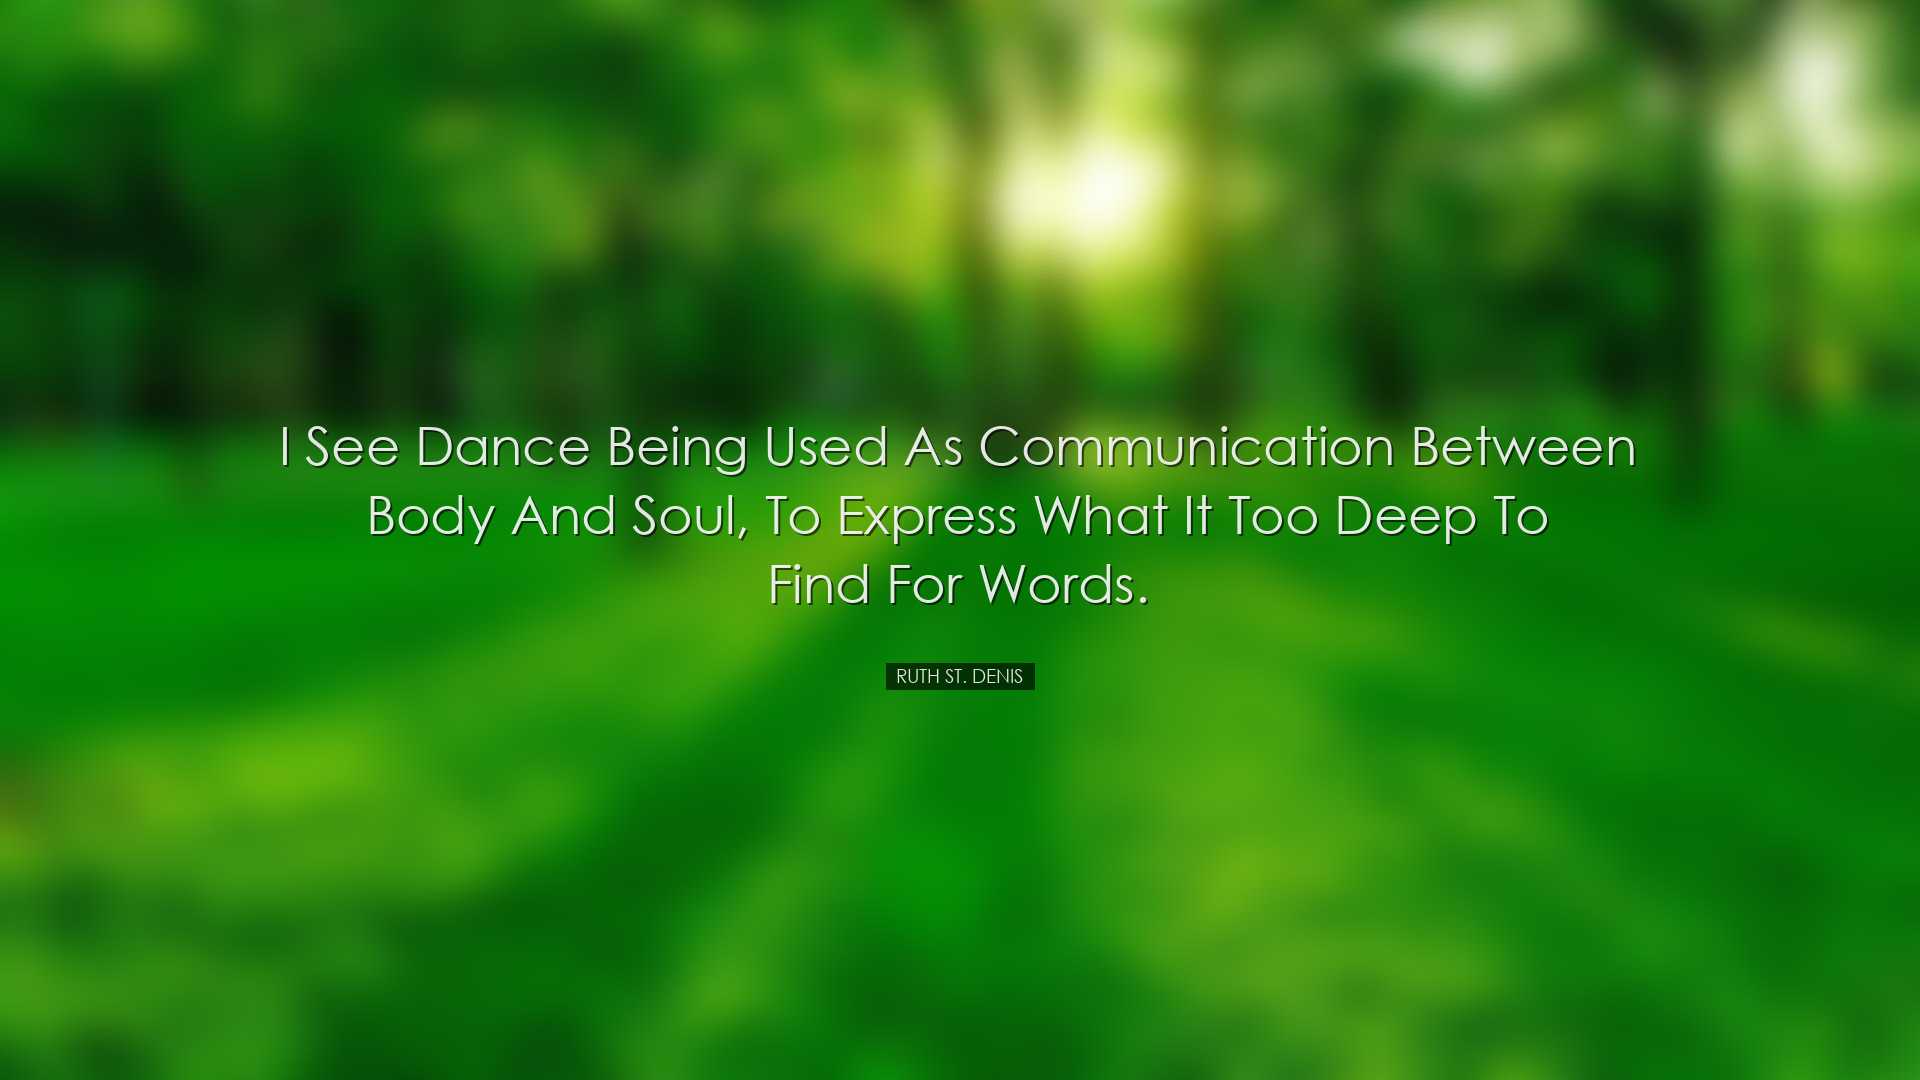 I see dance being used as communication between body and soul, to